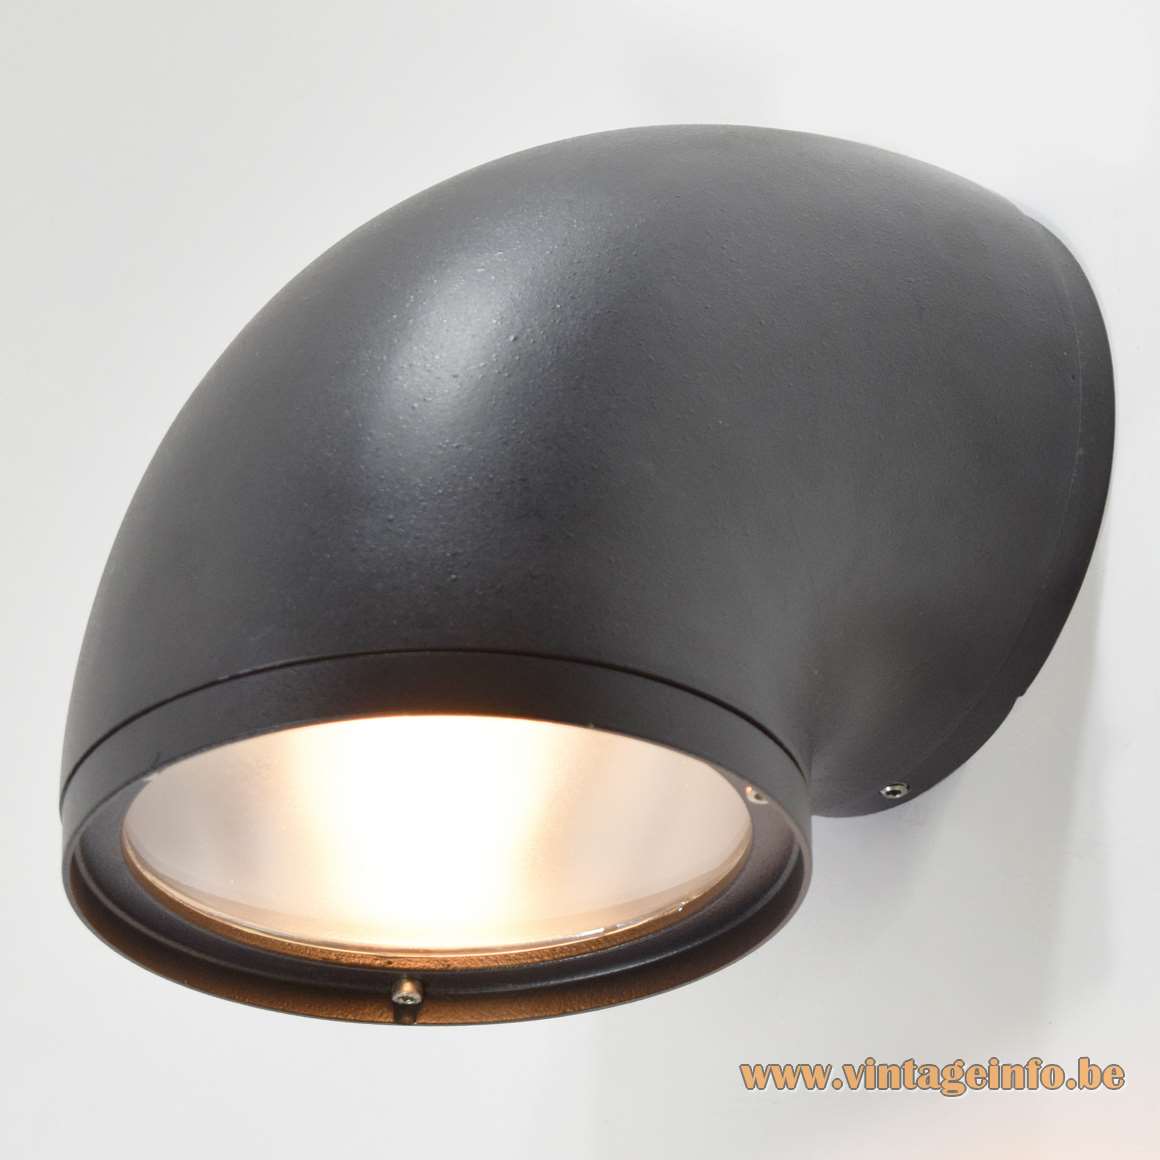 BEGA 1980s outdoor curved wall lamp 2276 garden light black anthracite aluminium wrinkle paint Germany